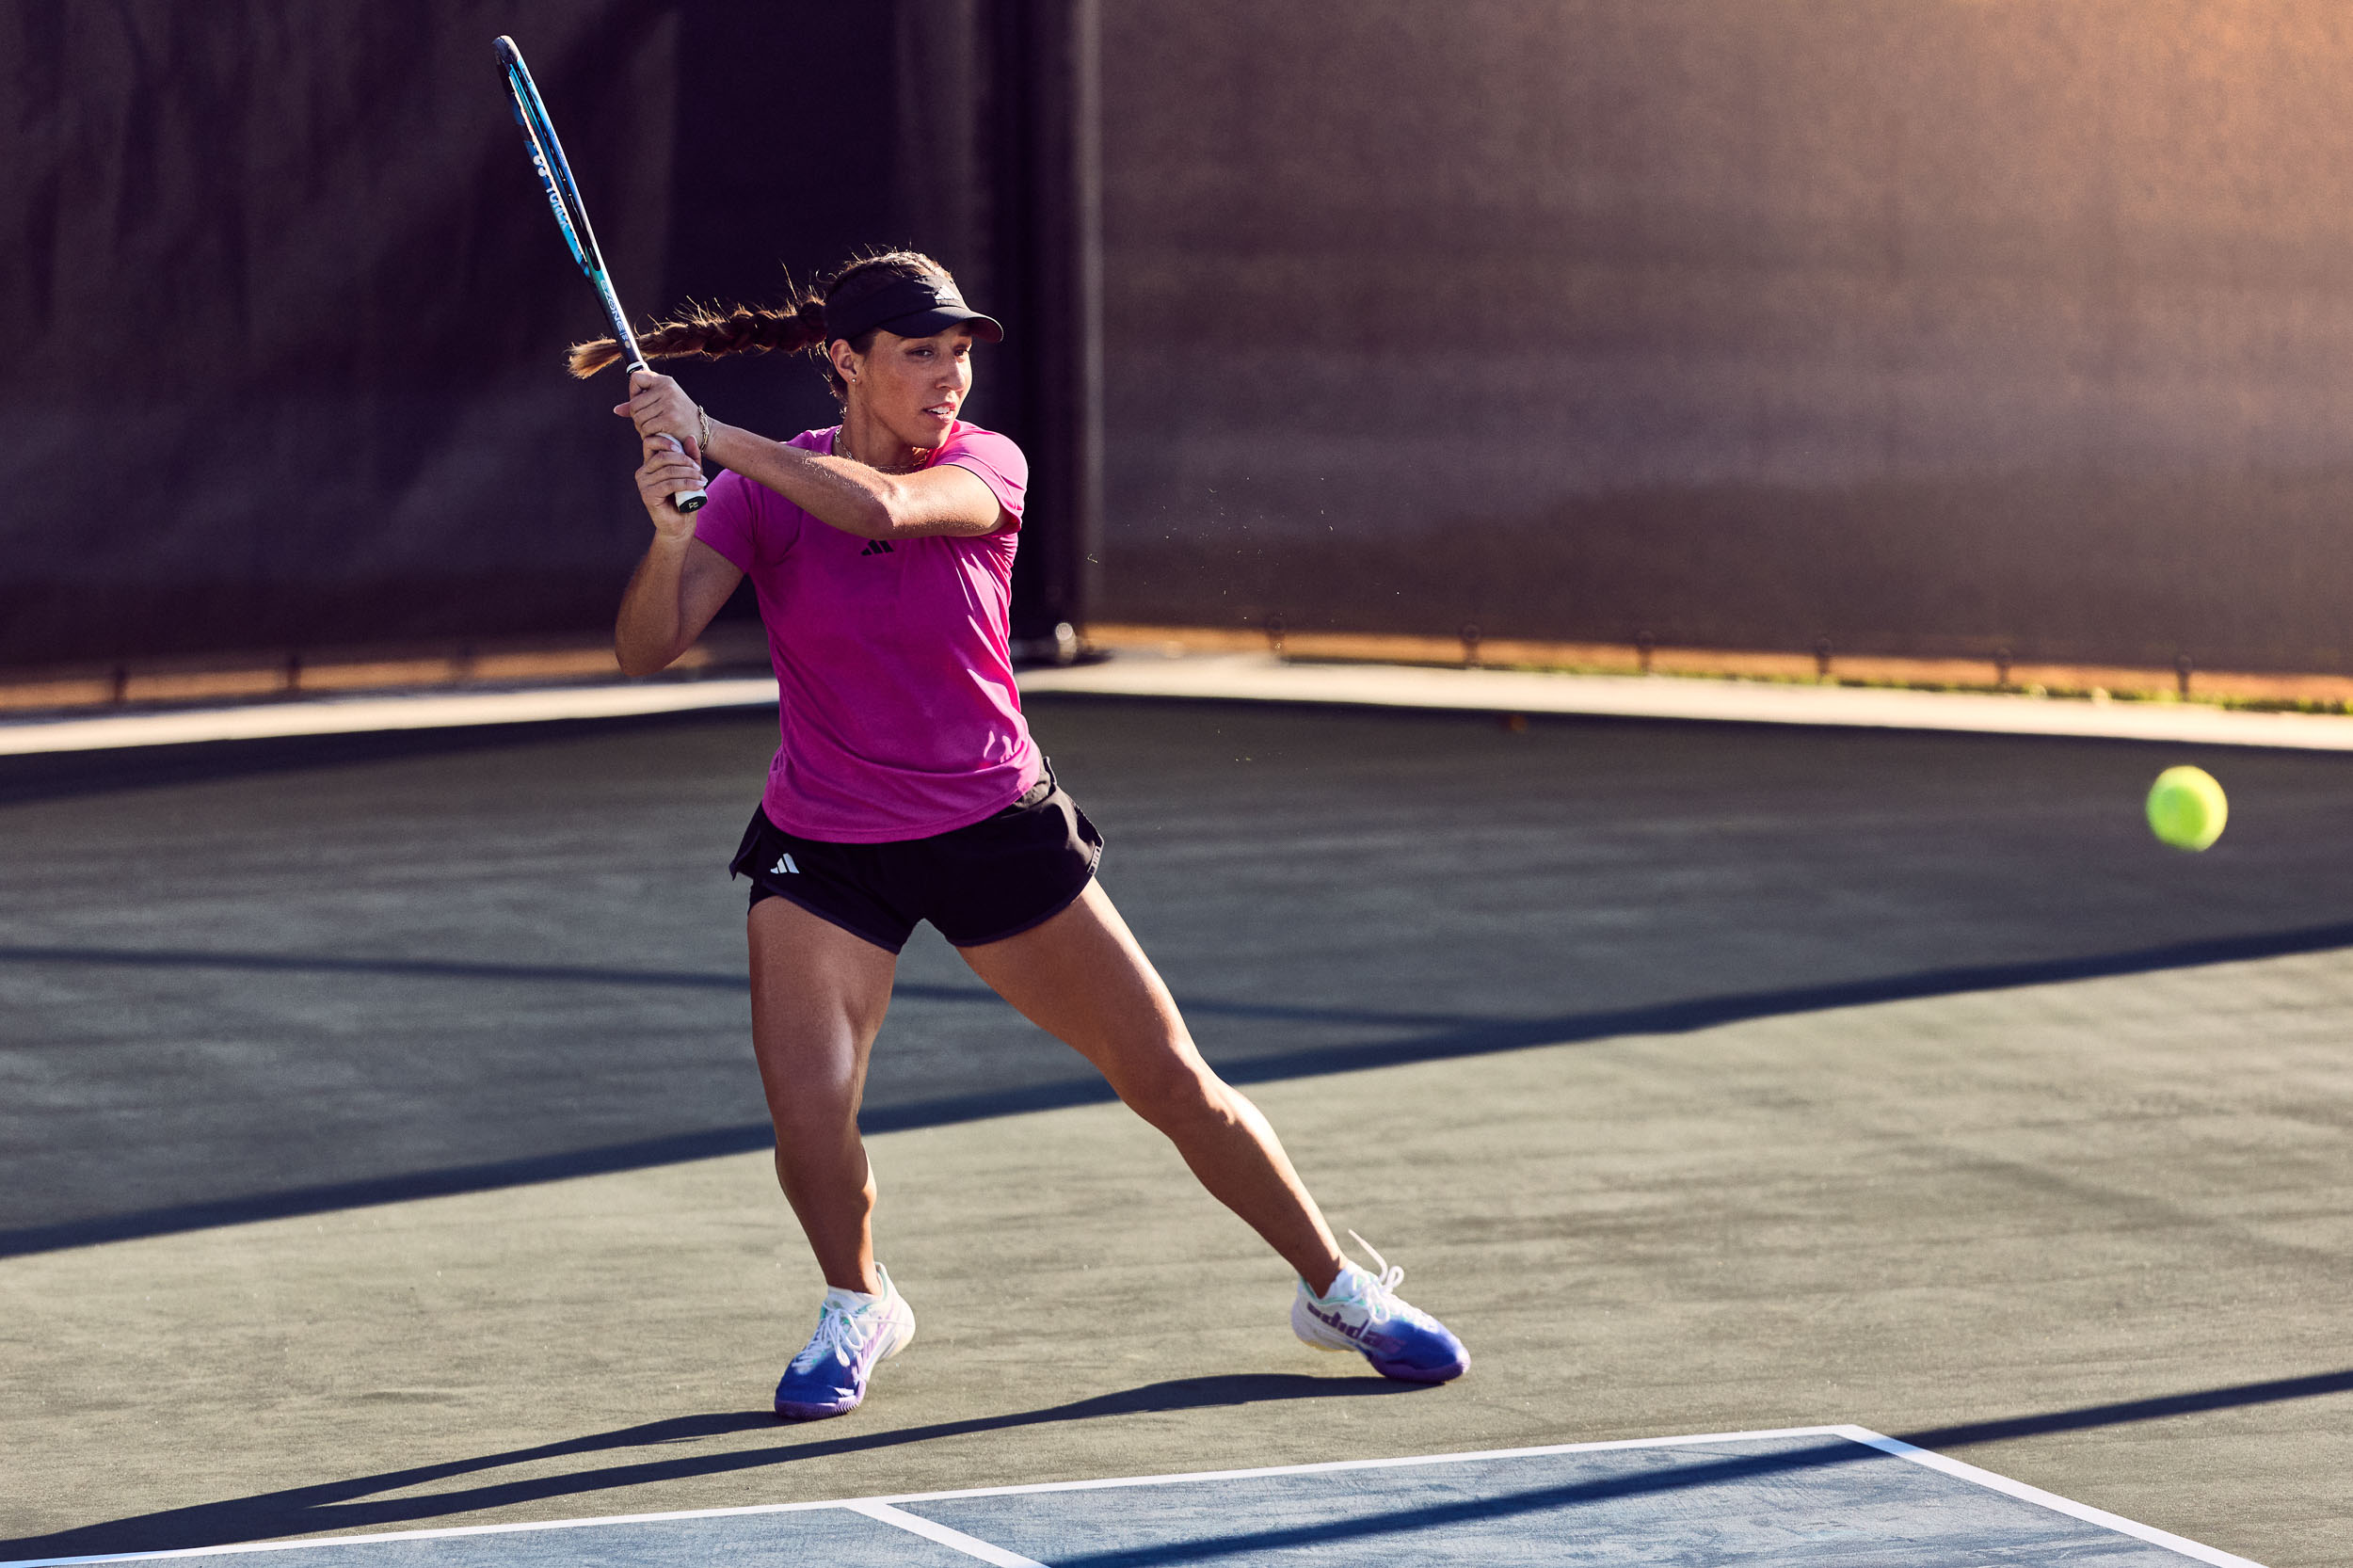 PROFESSIONAL TENNIS CHAMPION JESSICA PEGULA PHOTOGRAPHY BY COMMERCIAL ADVERTISING PHOTOGRAPHER IN FLORIDA FOR SPORTS DRINK BRAND READY